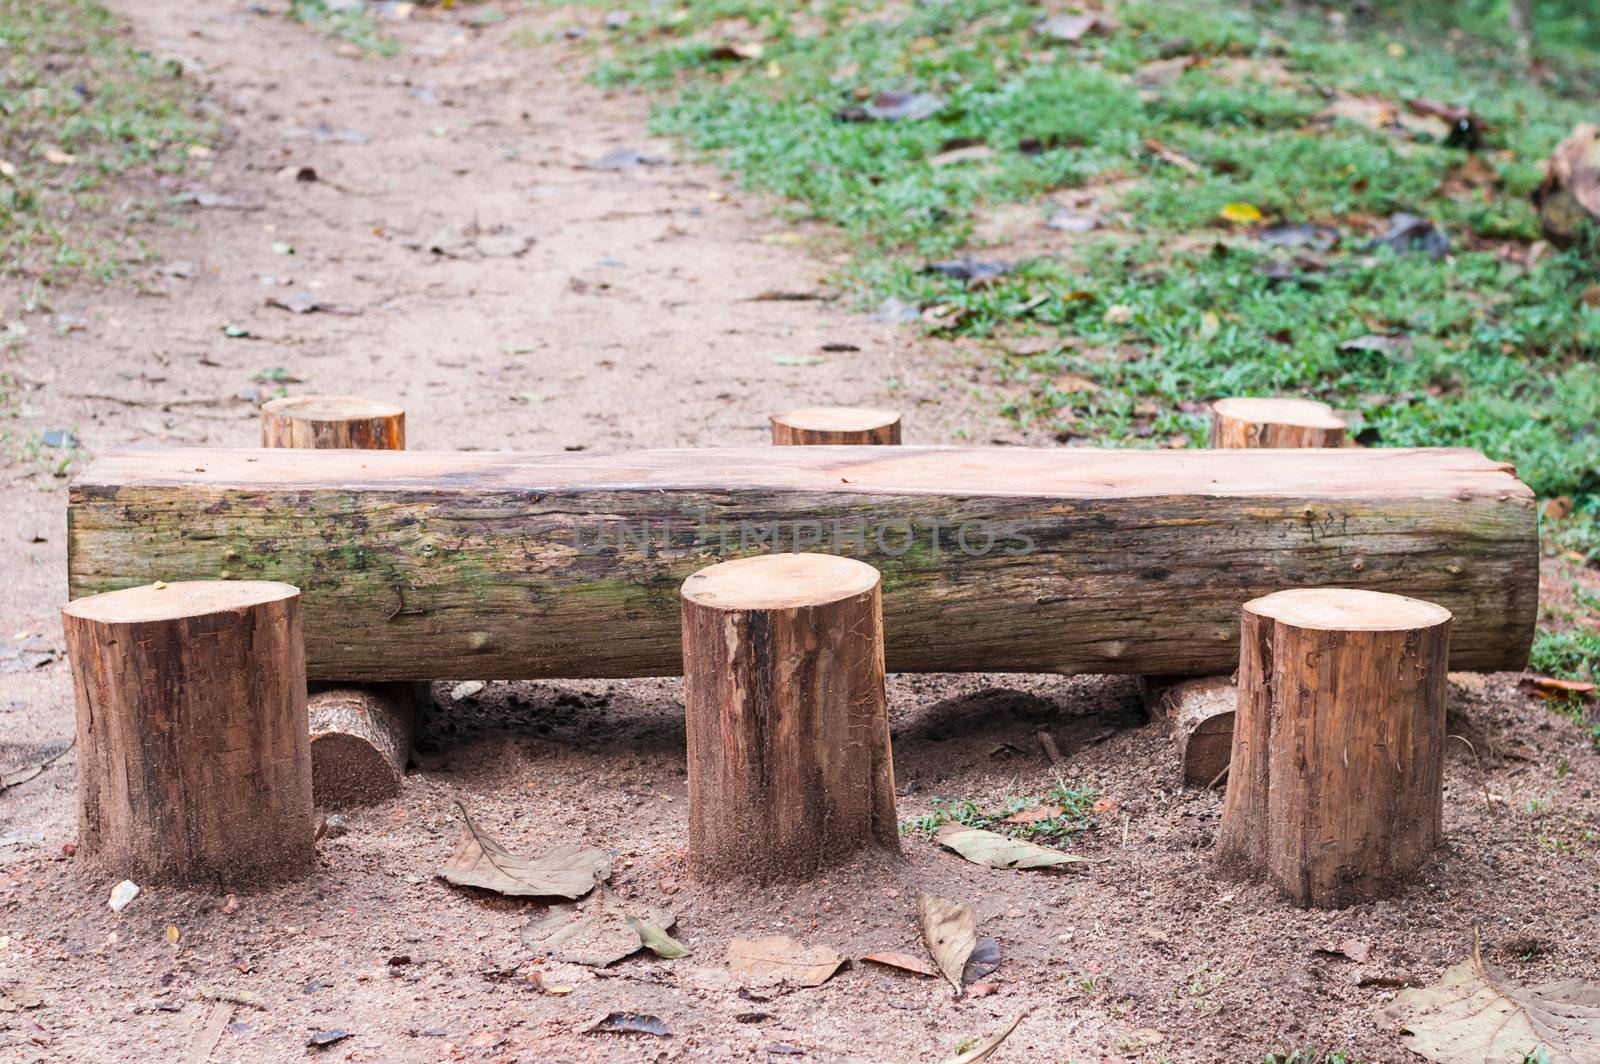 Wooden bench and table made of tree trunks stumps